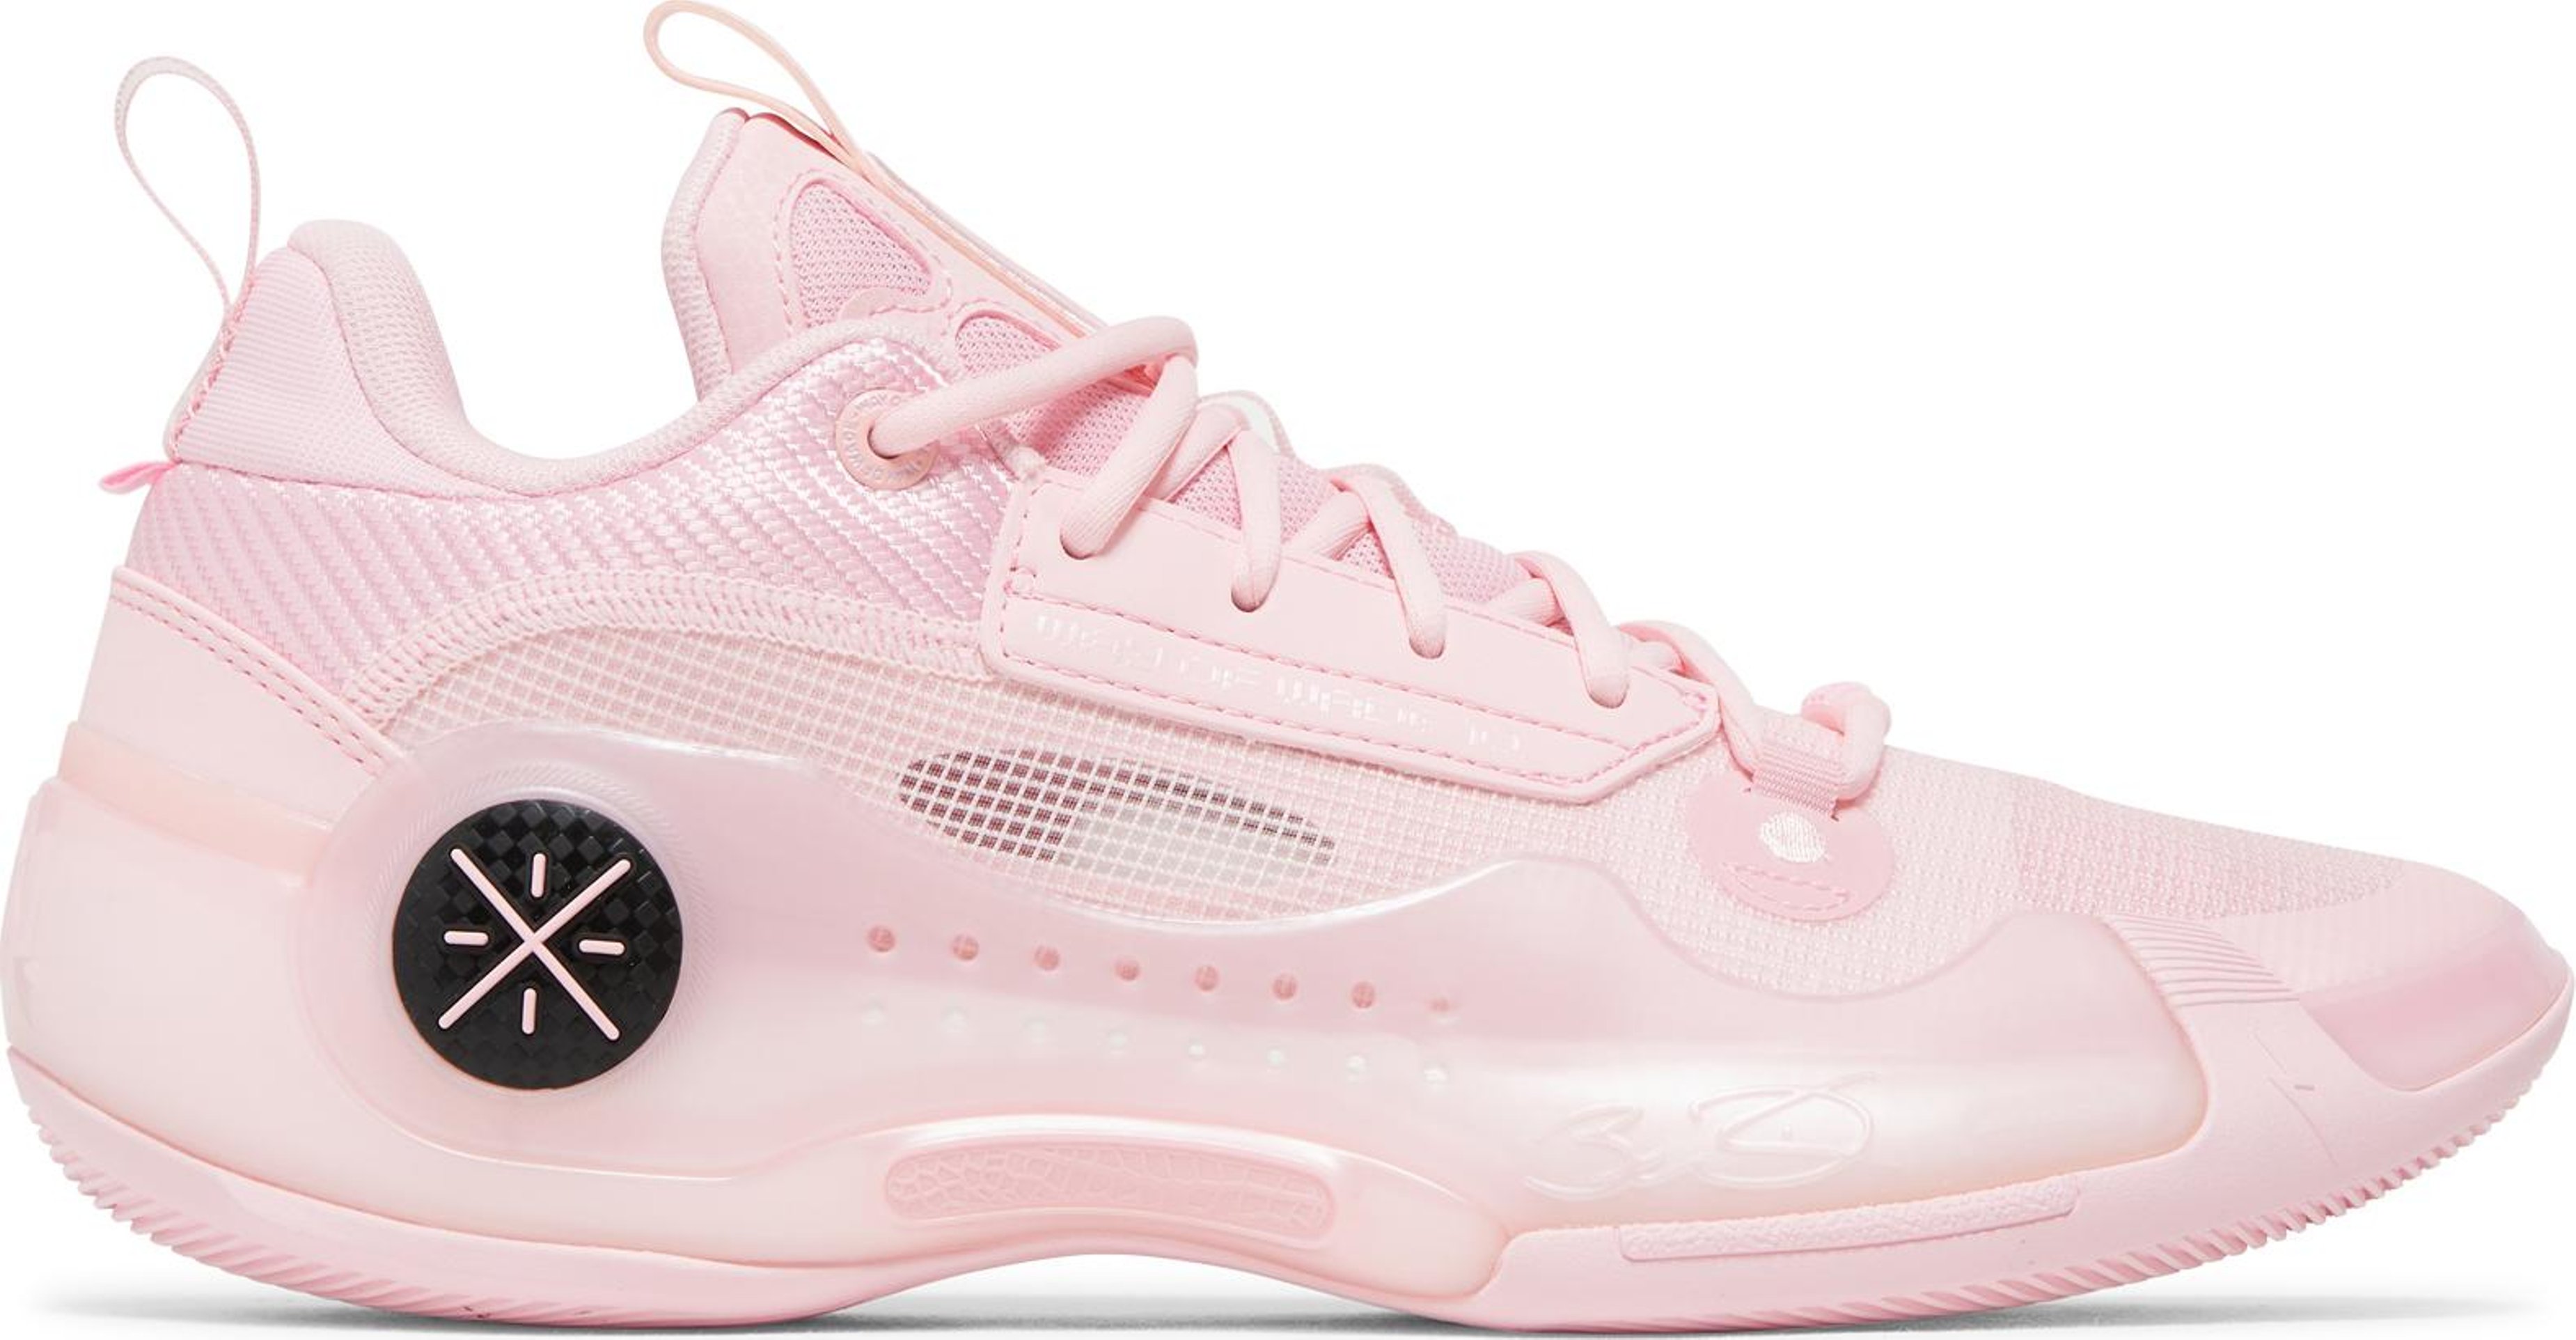 Buy Way of Wade 10 Low 'Cherry Blossom' - ABAS083 3 | GOAT